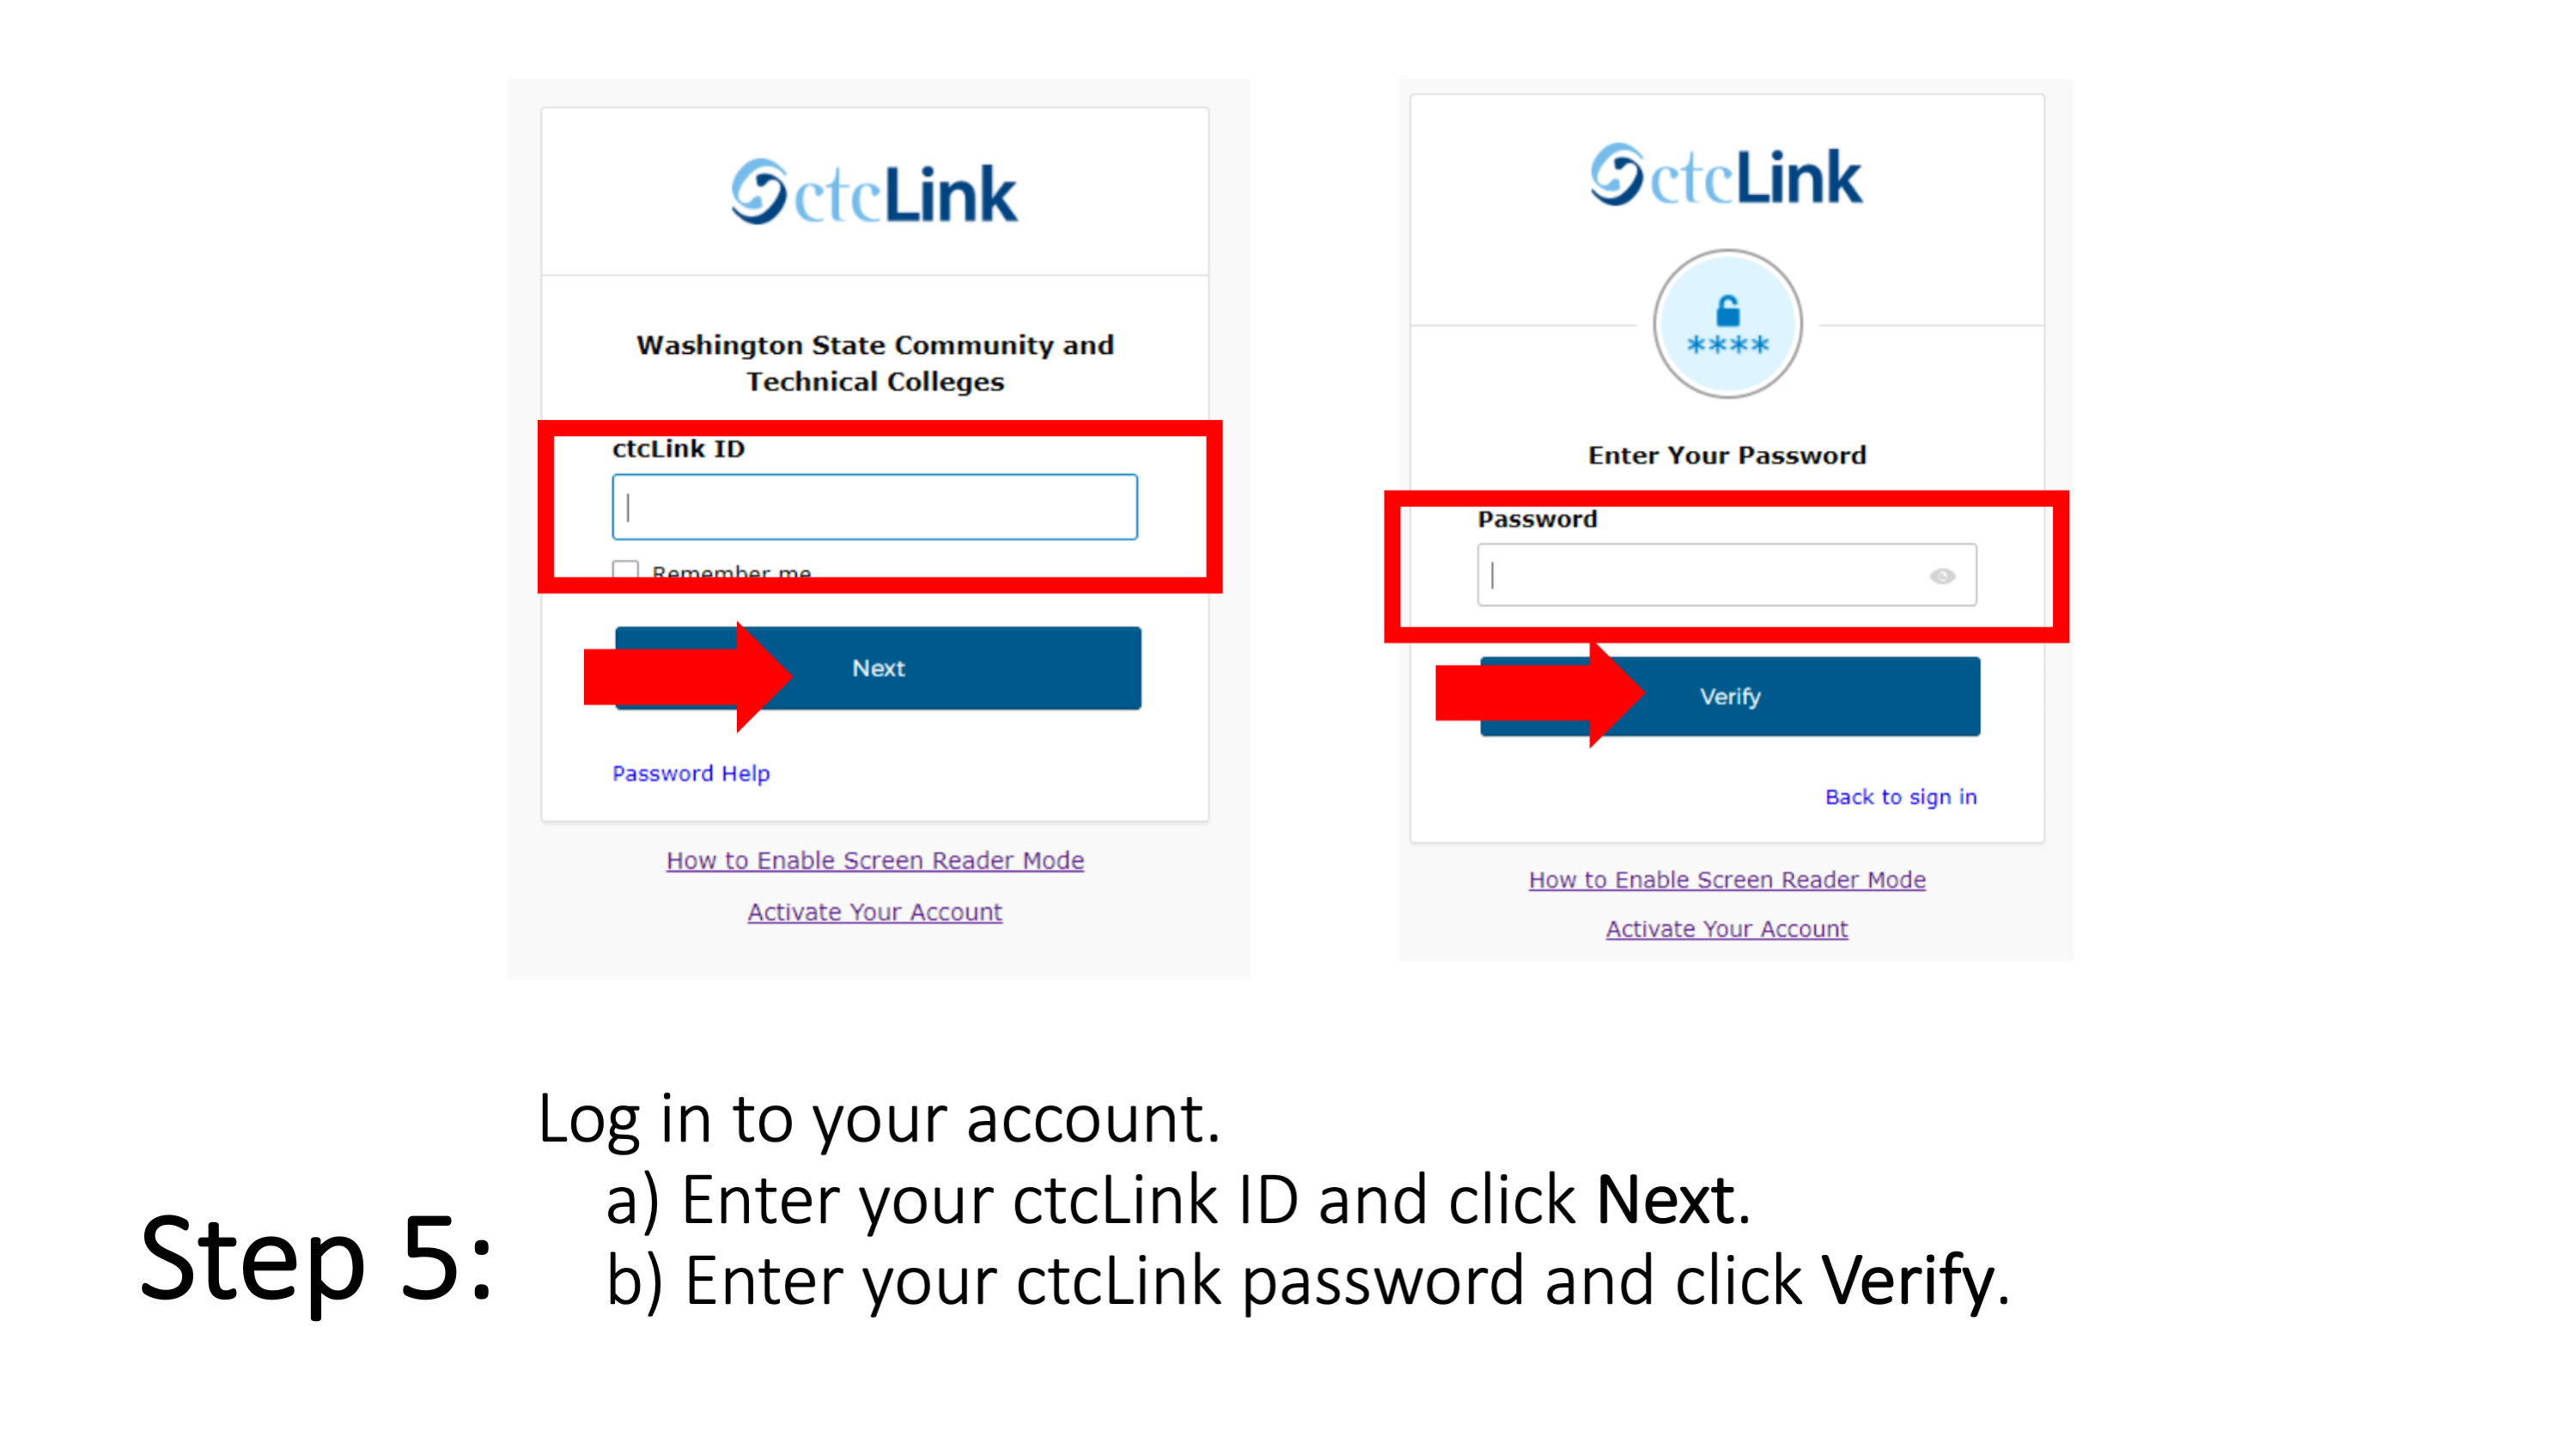 Step 5: Log in to your account: a) enter your ctcLink ID and click Next; b) enter your ctcLink password and click Verify. 